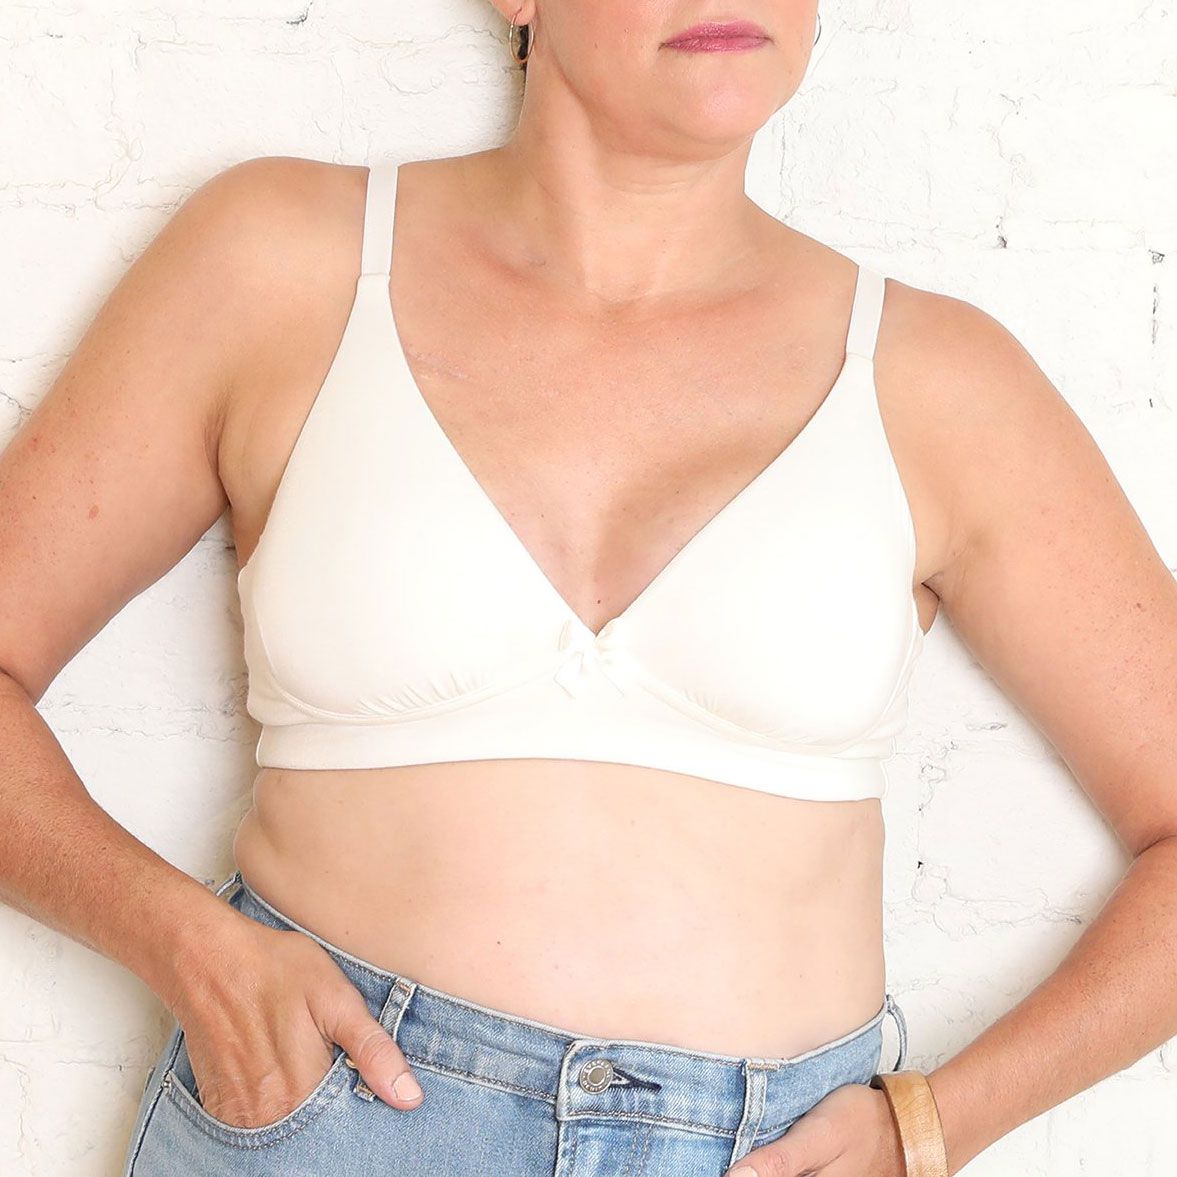 Things to Wear Home Post-Mastectomy - A Fitting Experience